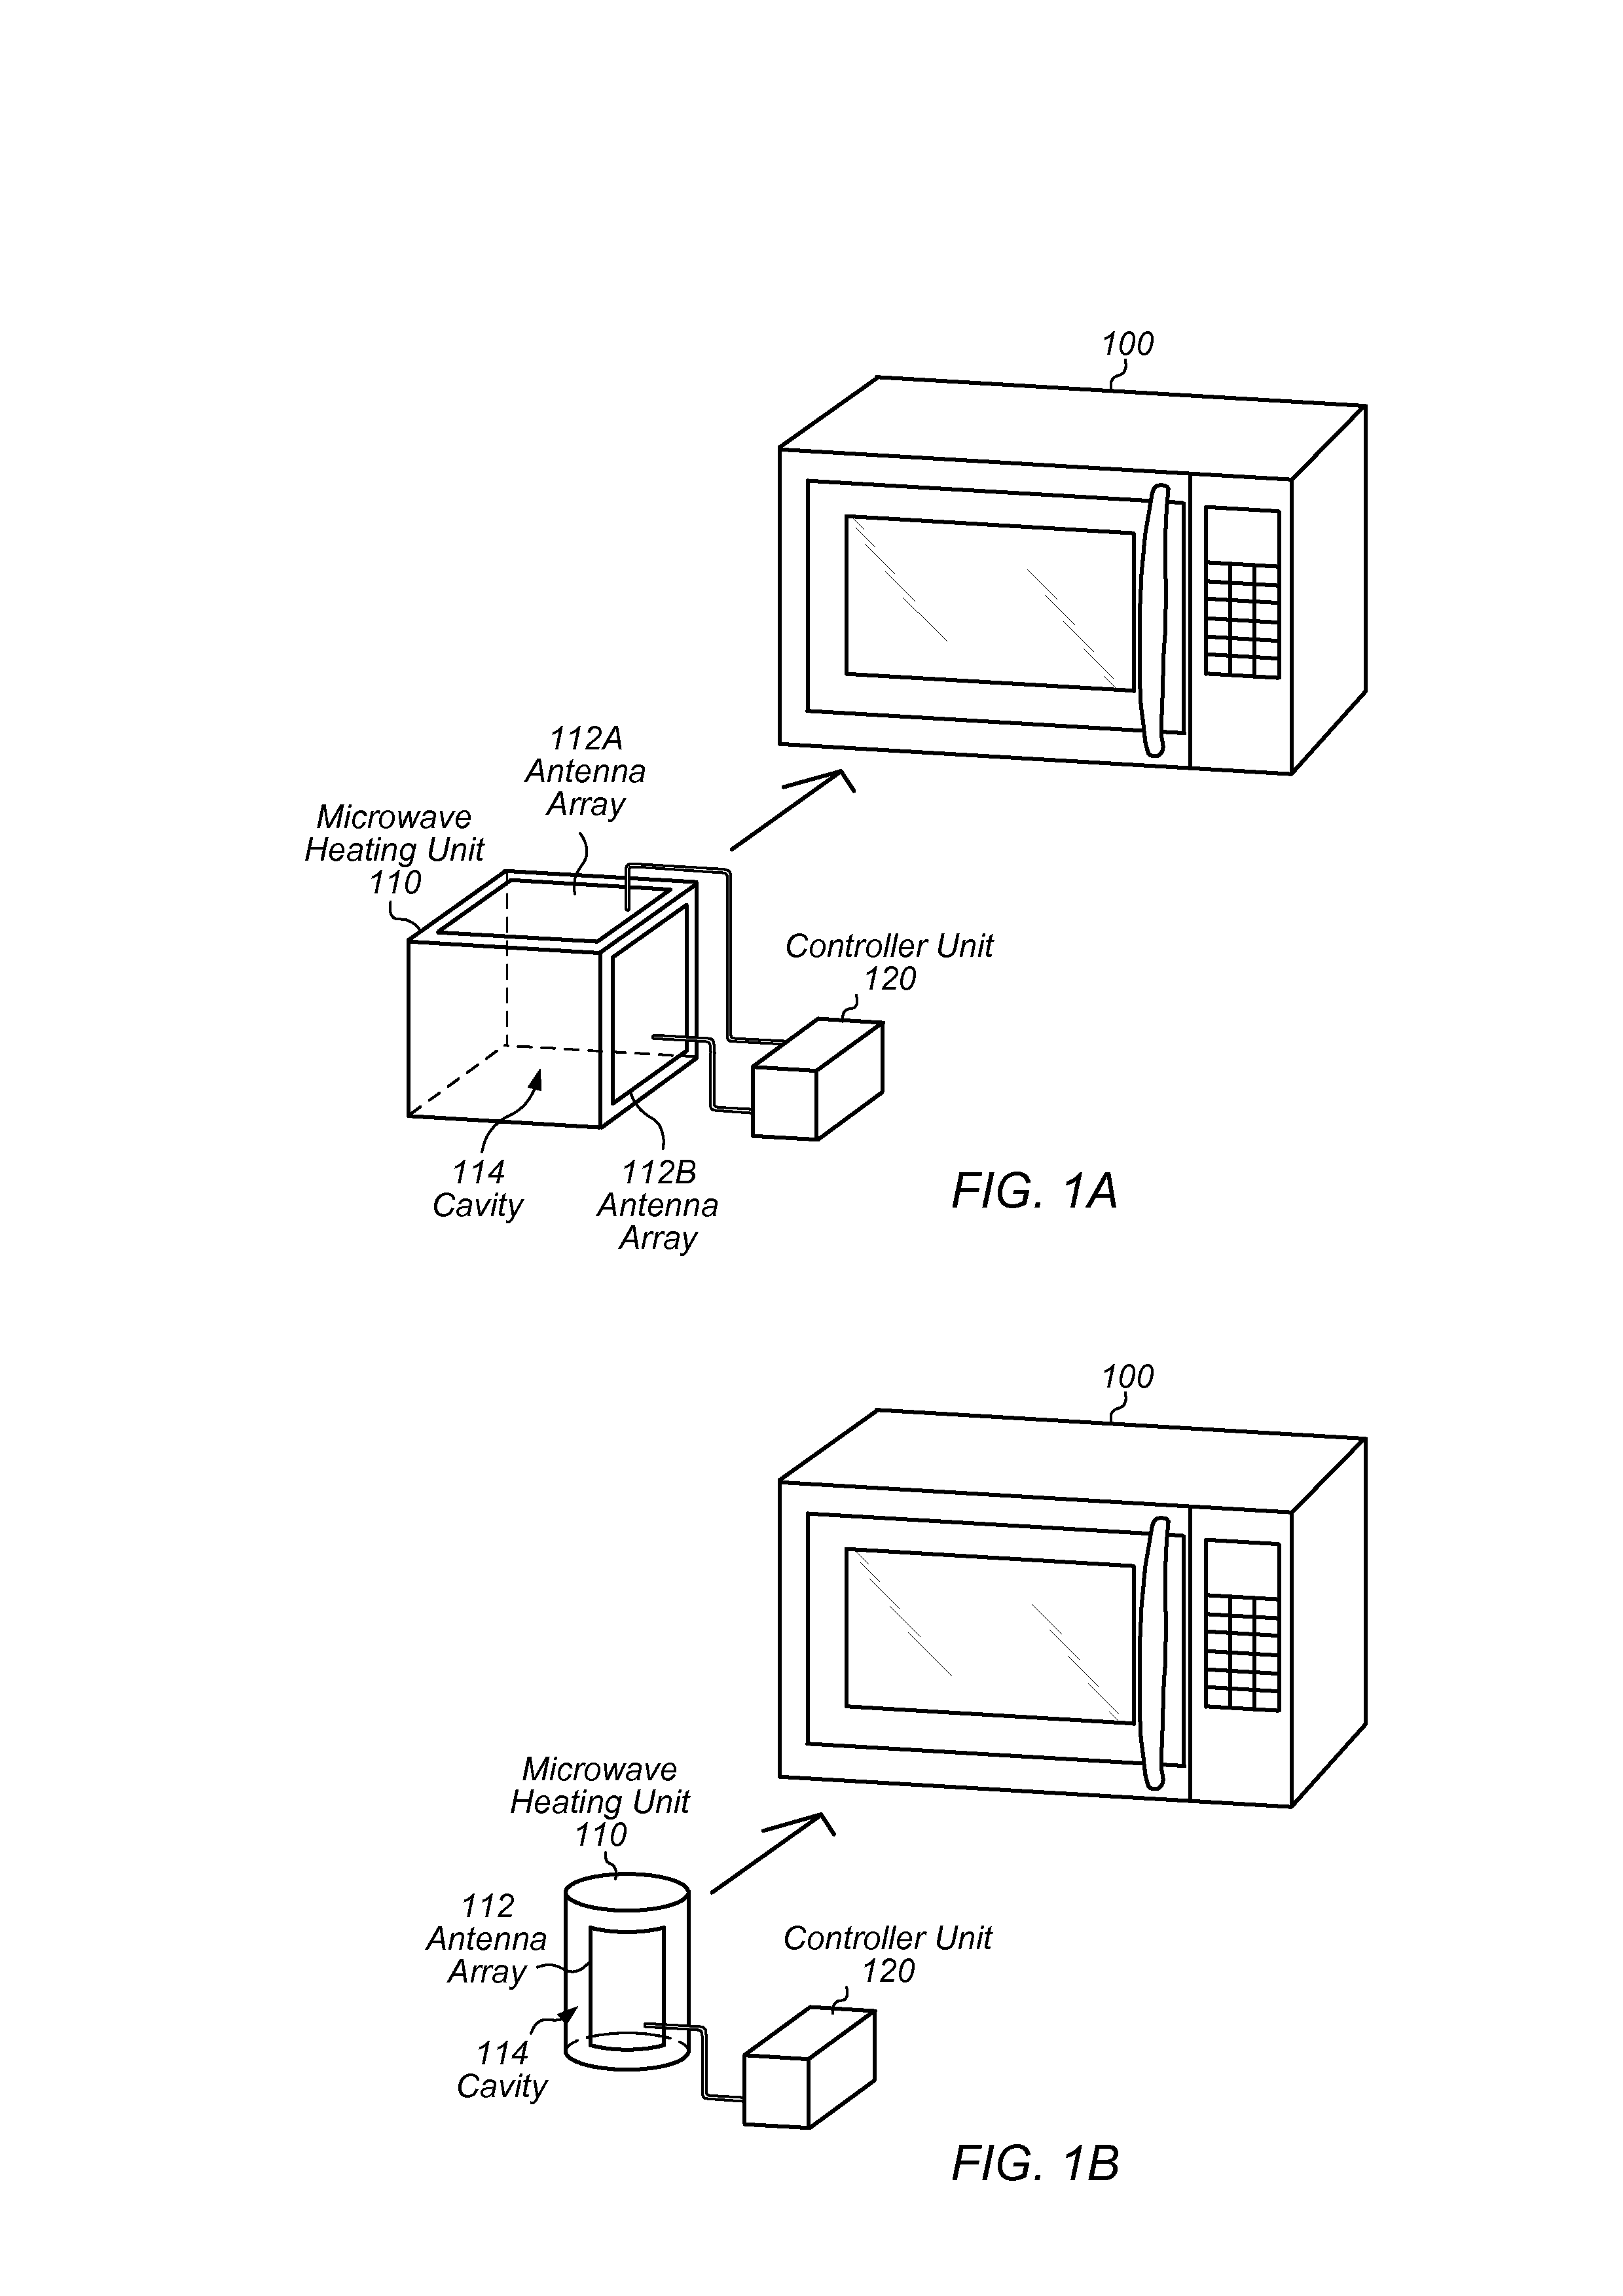 Microwave oven with antenna array